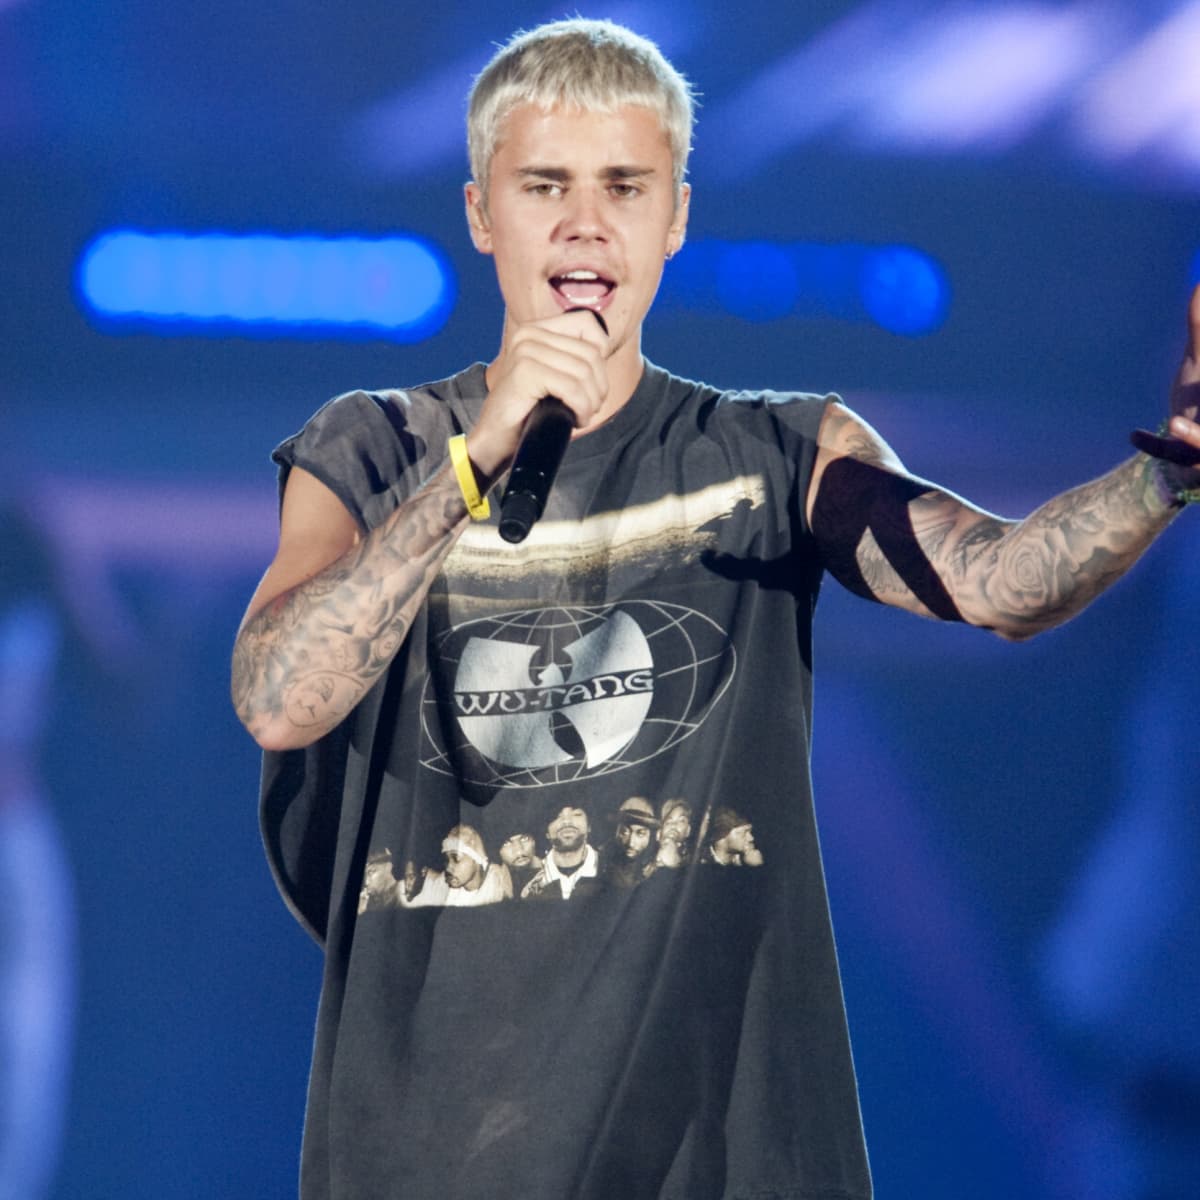 Justin Biebers Latest Tattoo May Include a Secret Message to Selena Gomez